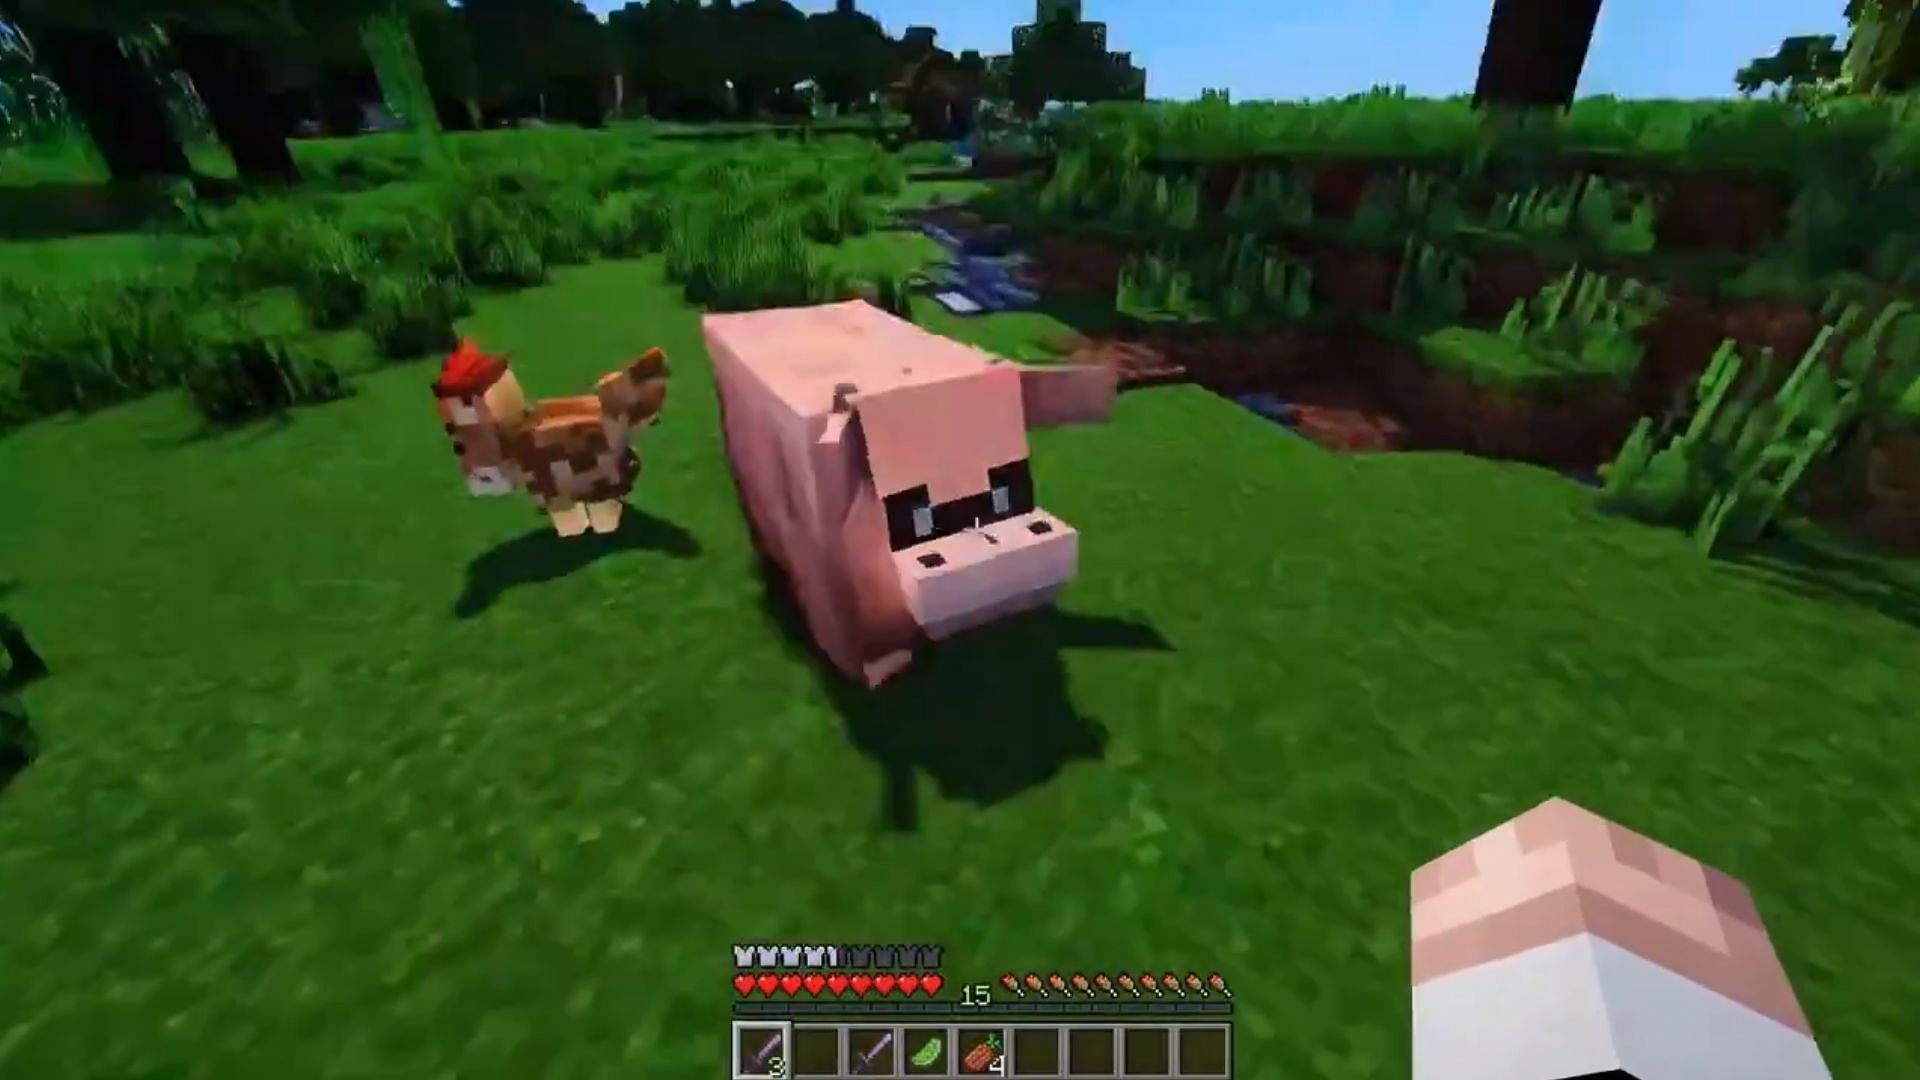 Bizarre Minecraft gameplay created by Open AI